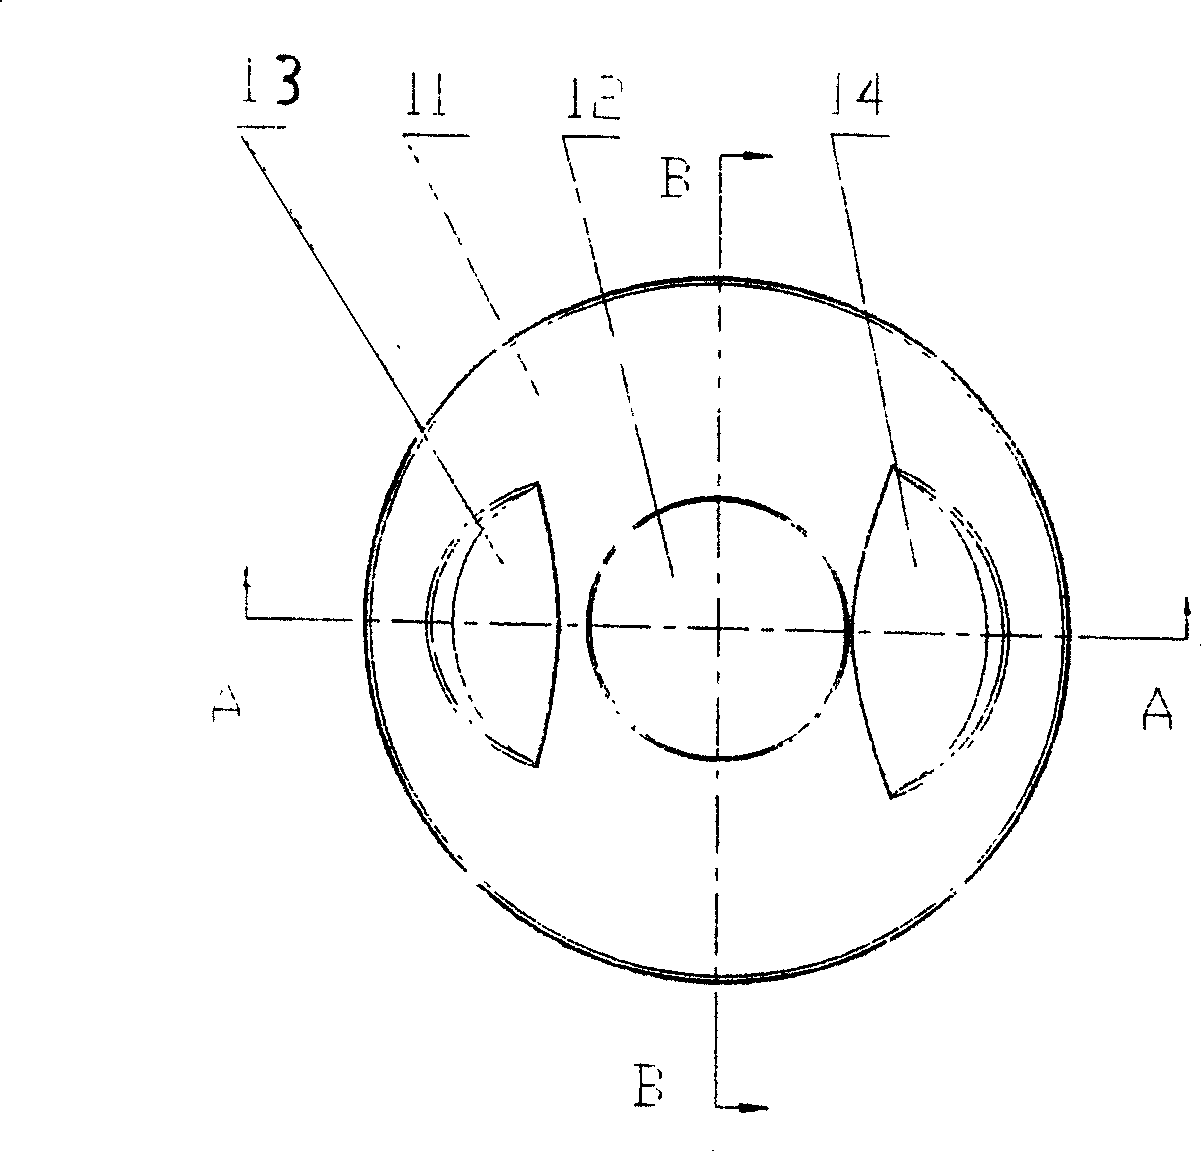 Spherical motorcycle engine combustion chamber